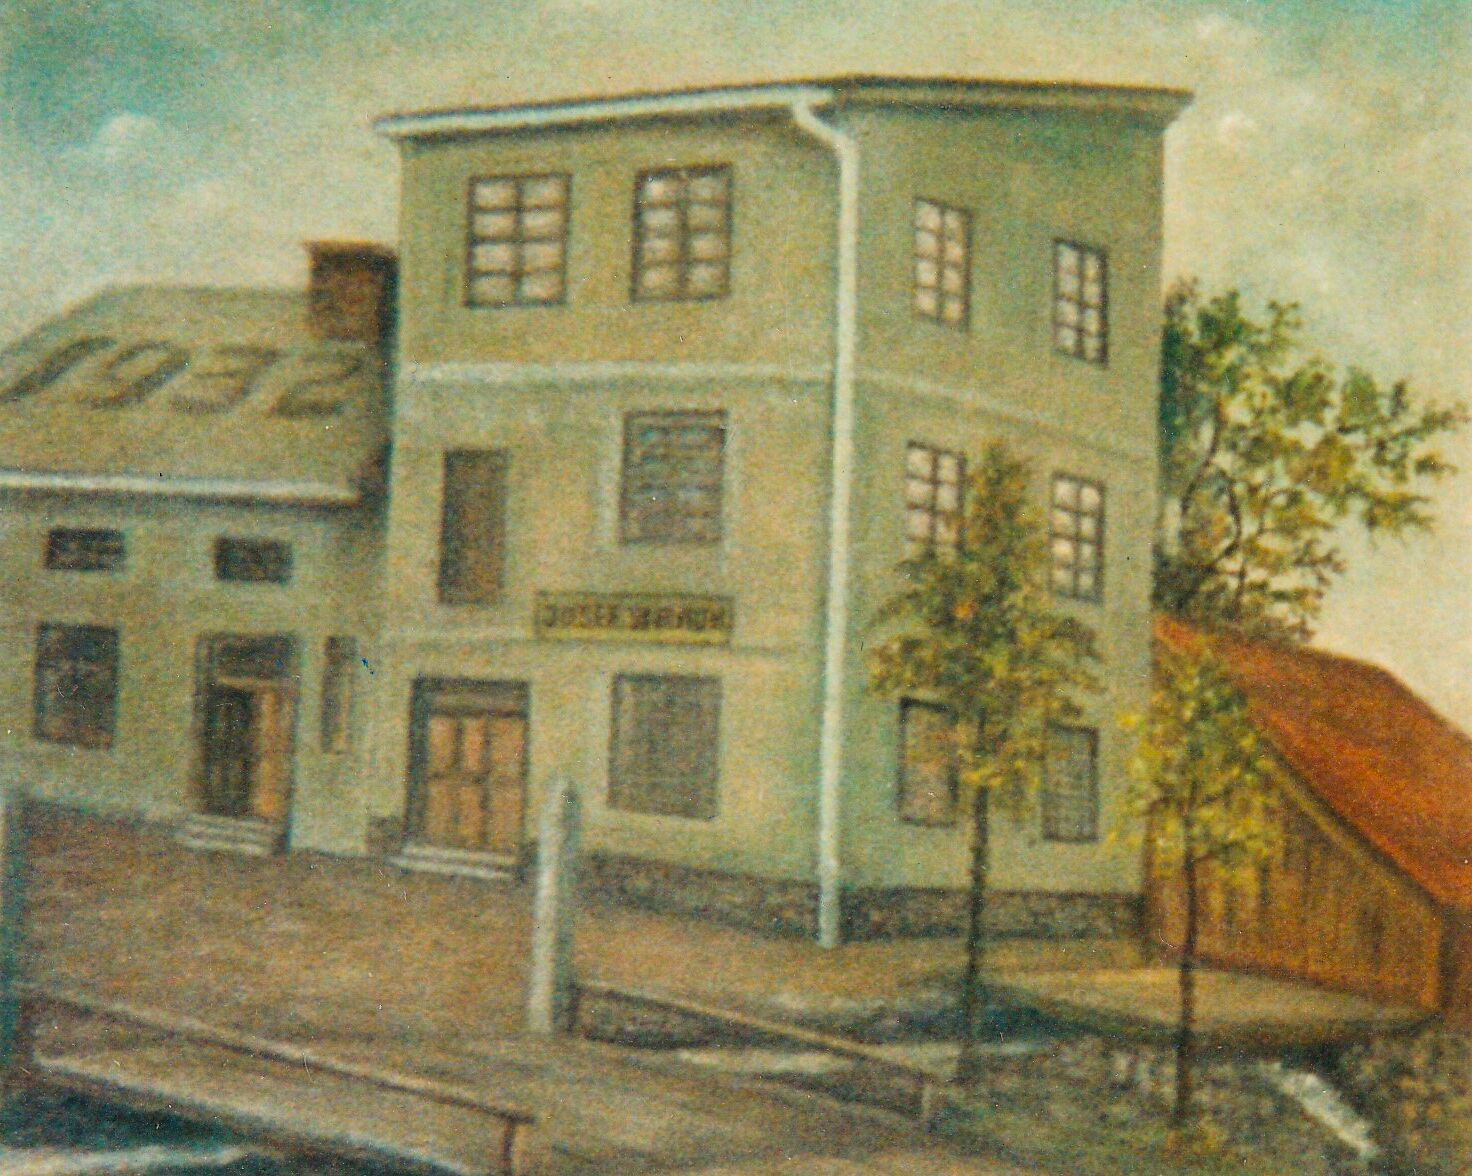 The house in Hyršov, where Anna Fischer spent her childhood